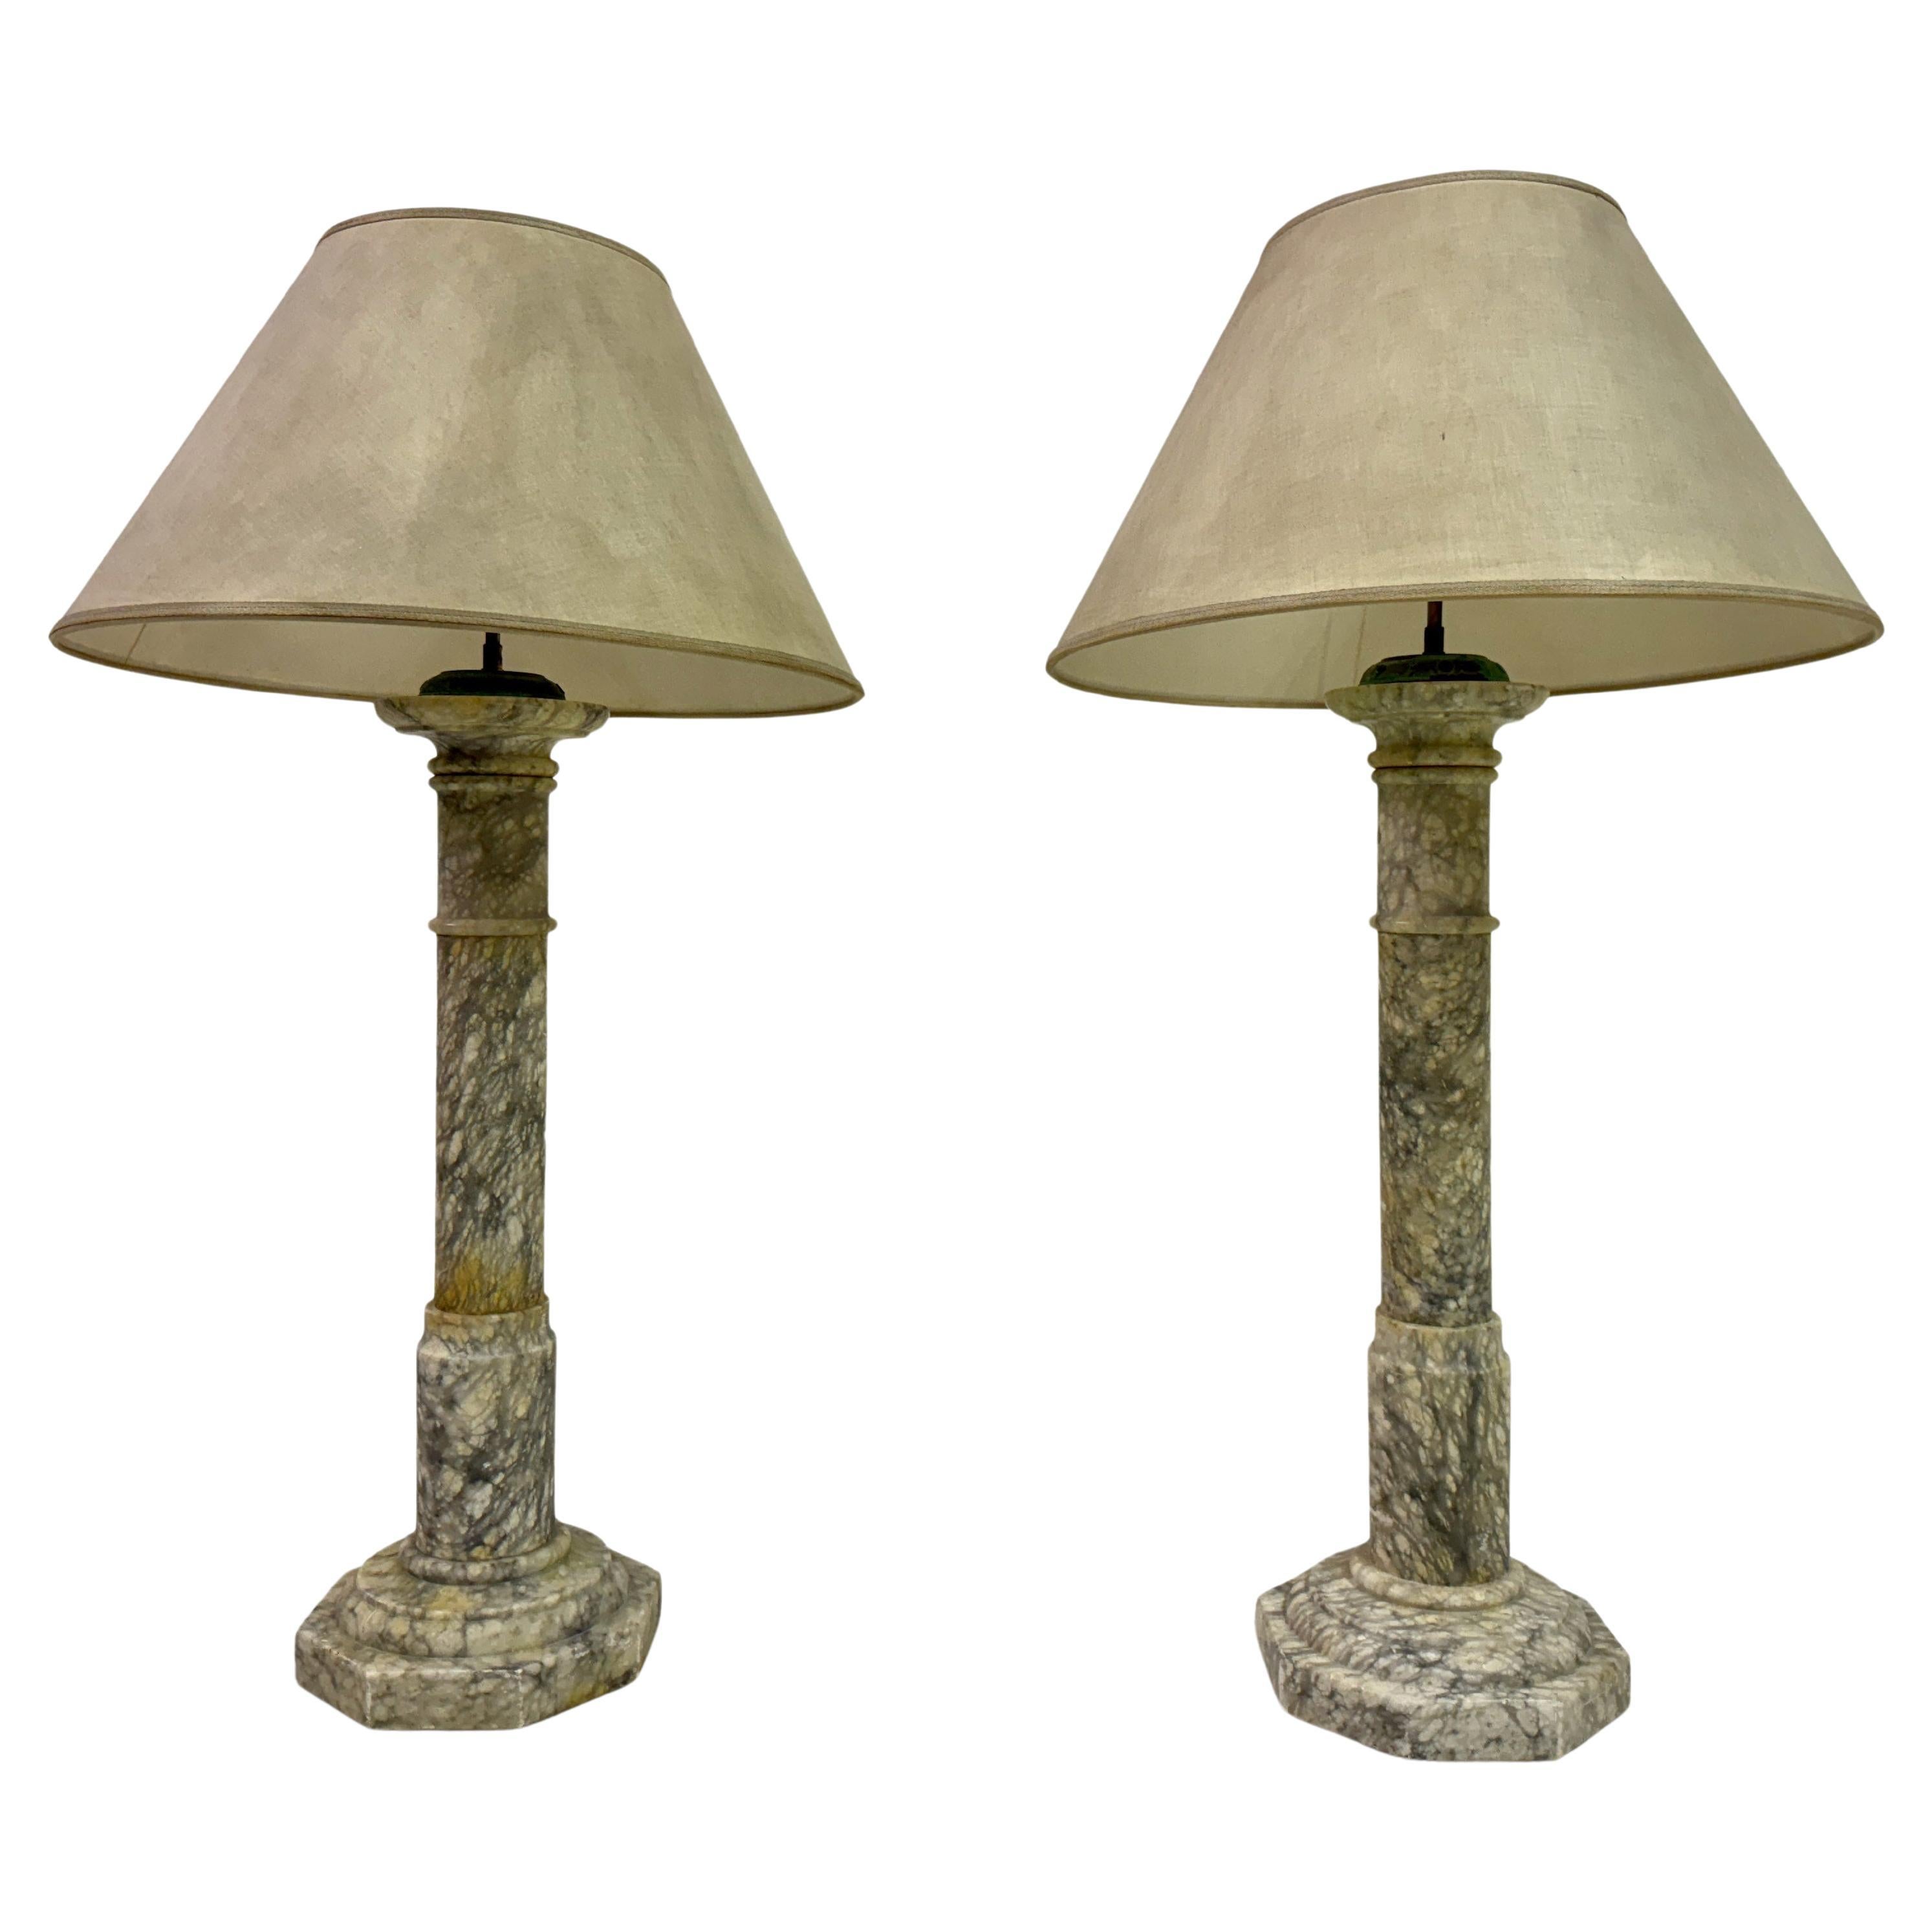 Pair of Tall Alabaster Column Table Lamps